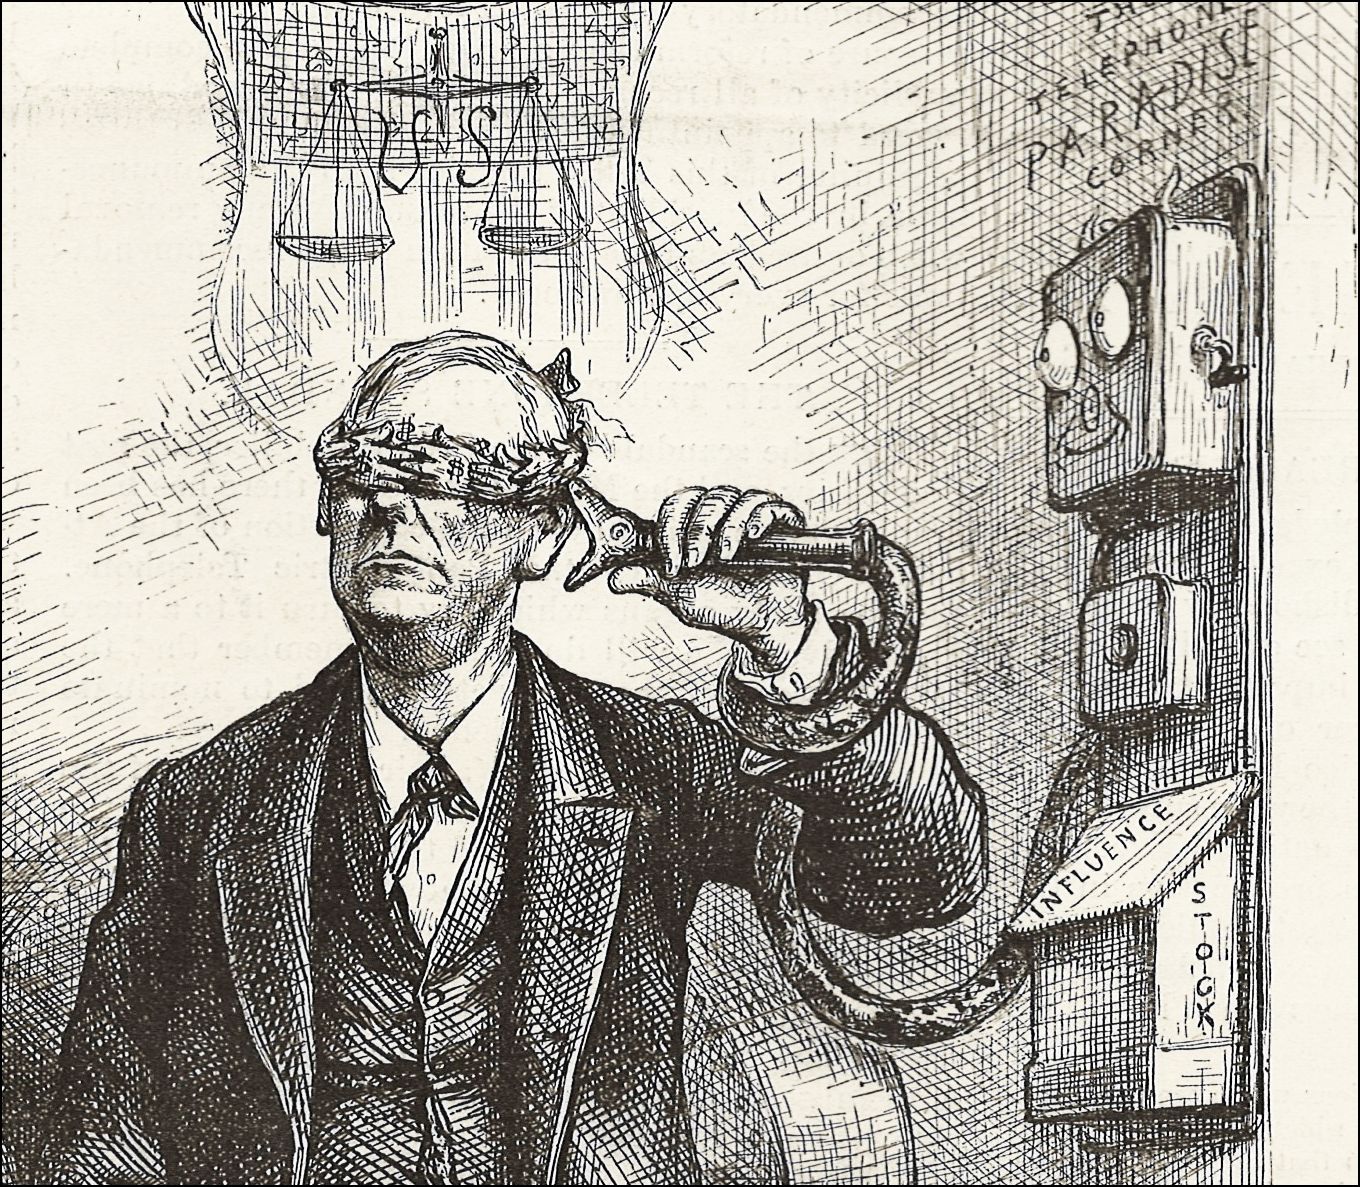 Thomas Nast drew numerous cartoons mocking Cleveland's Attorney General Augustus Garland after his Department of Justice brought suit to annul the Bell patents and it was revealed that Garland owned $500,000 worth of shares in a competing telephone company and would have become rich if Bell lost the patents. 